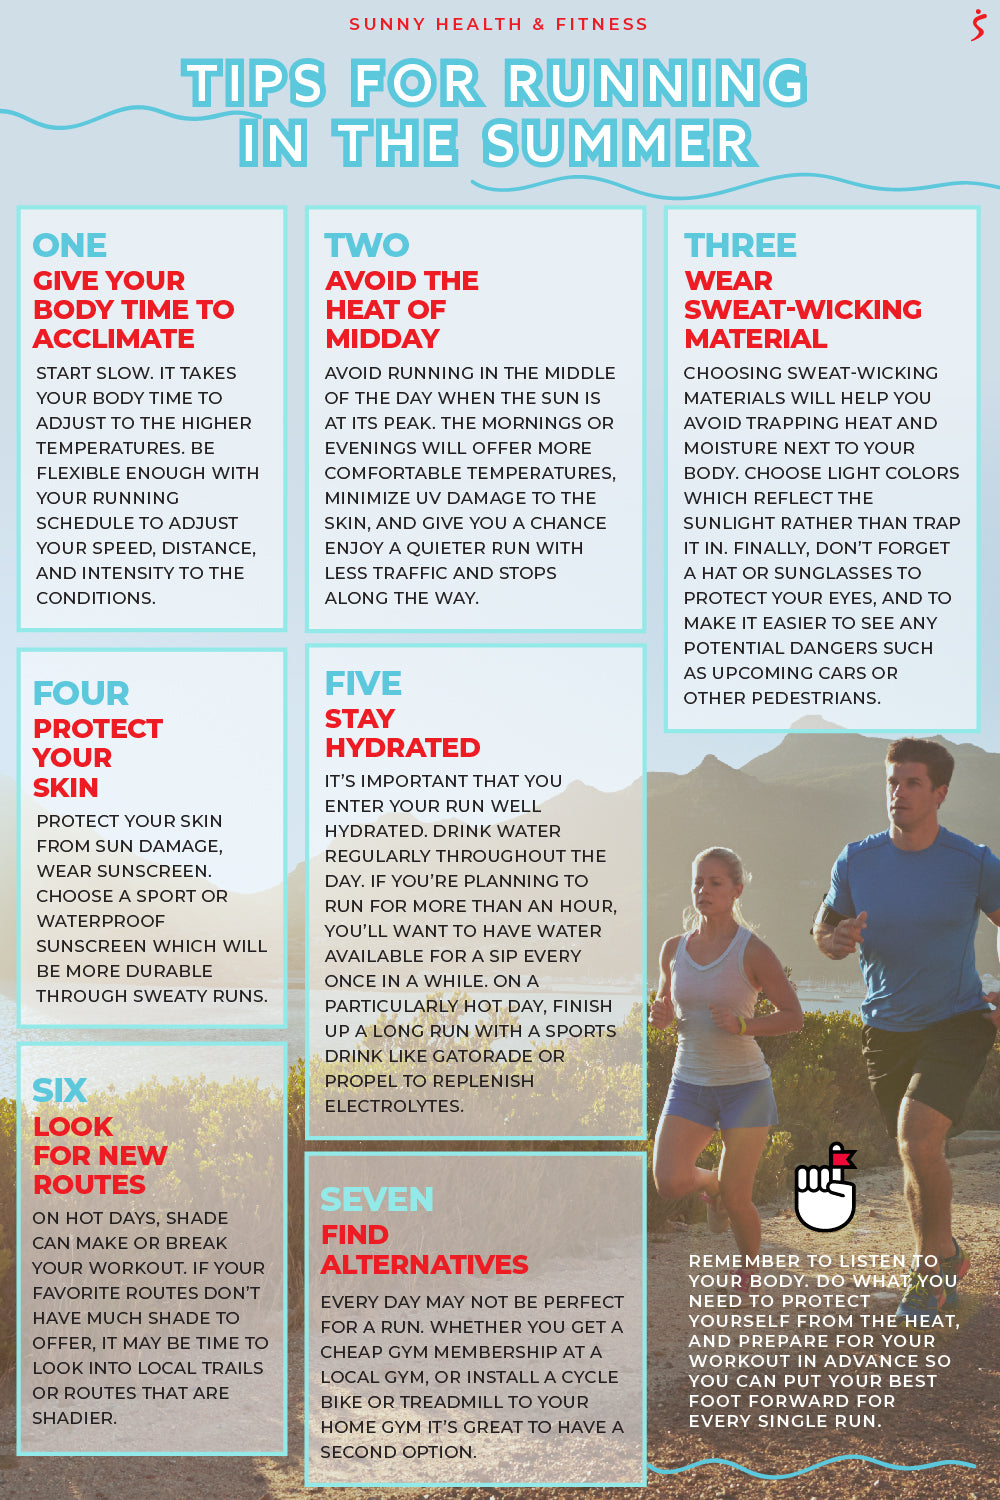 Hydration strategies for hot weather running